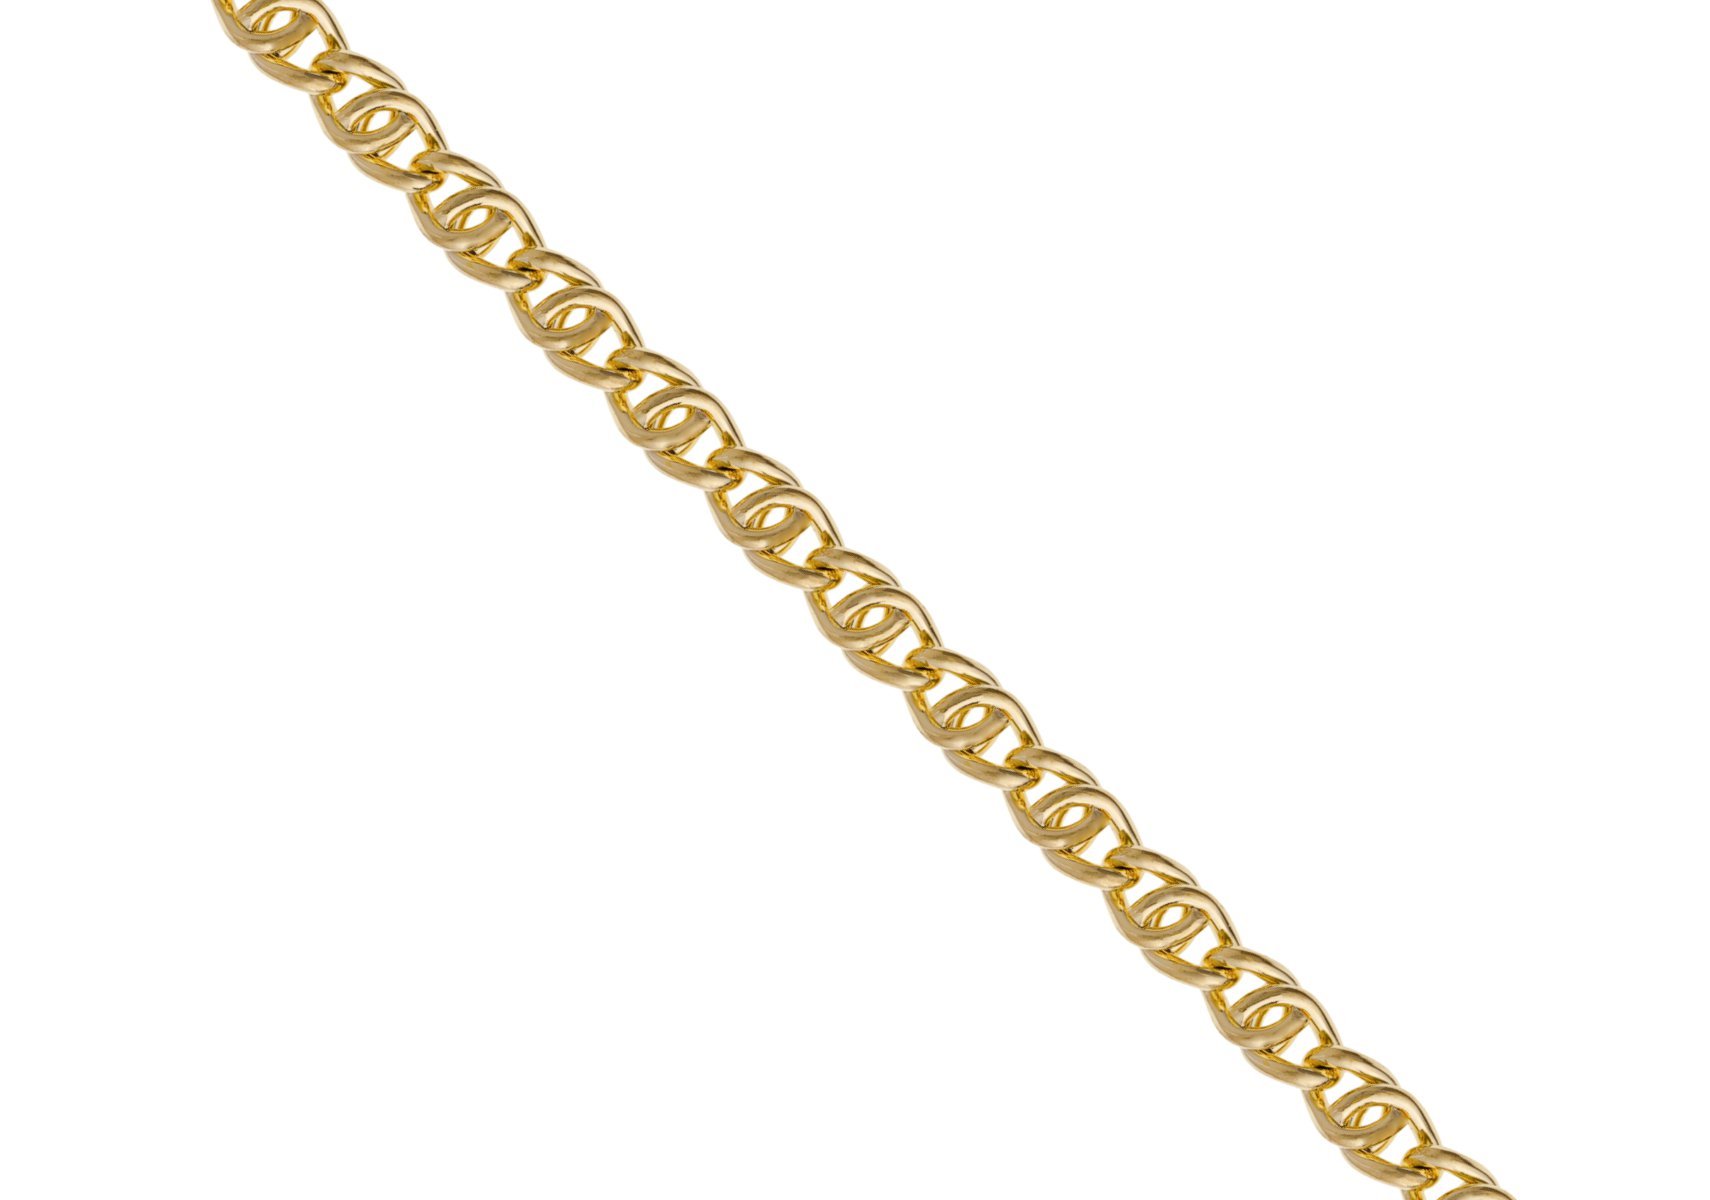 Panther eye tight gold chain machine